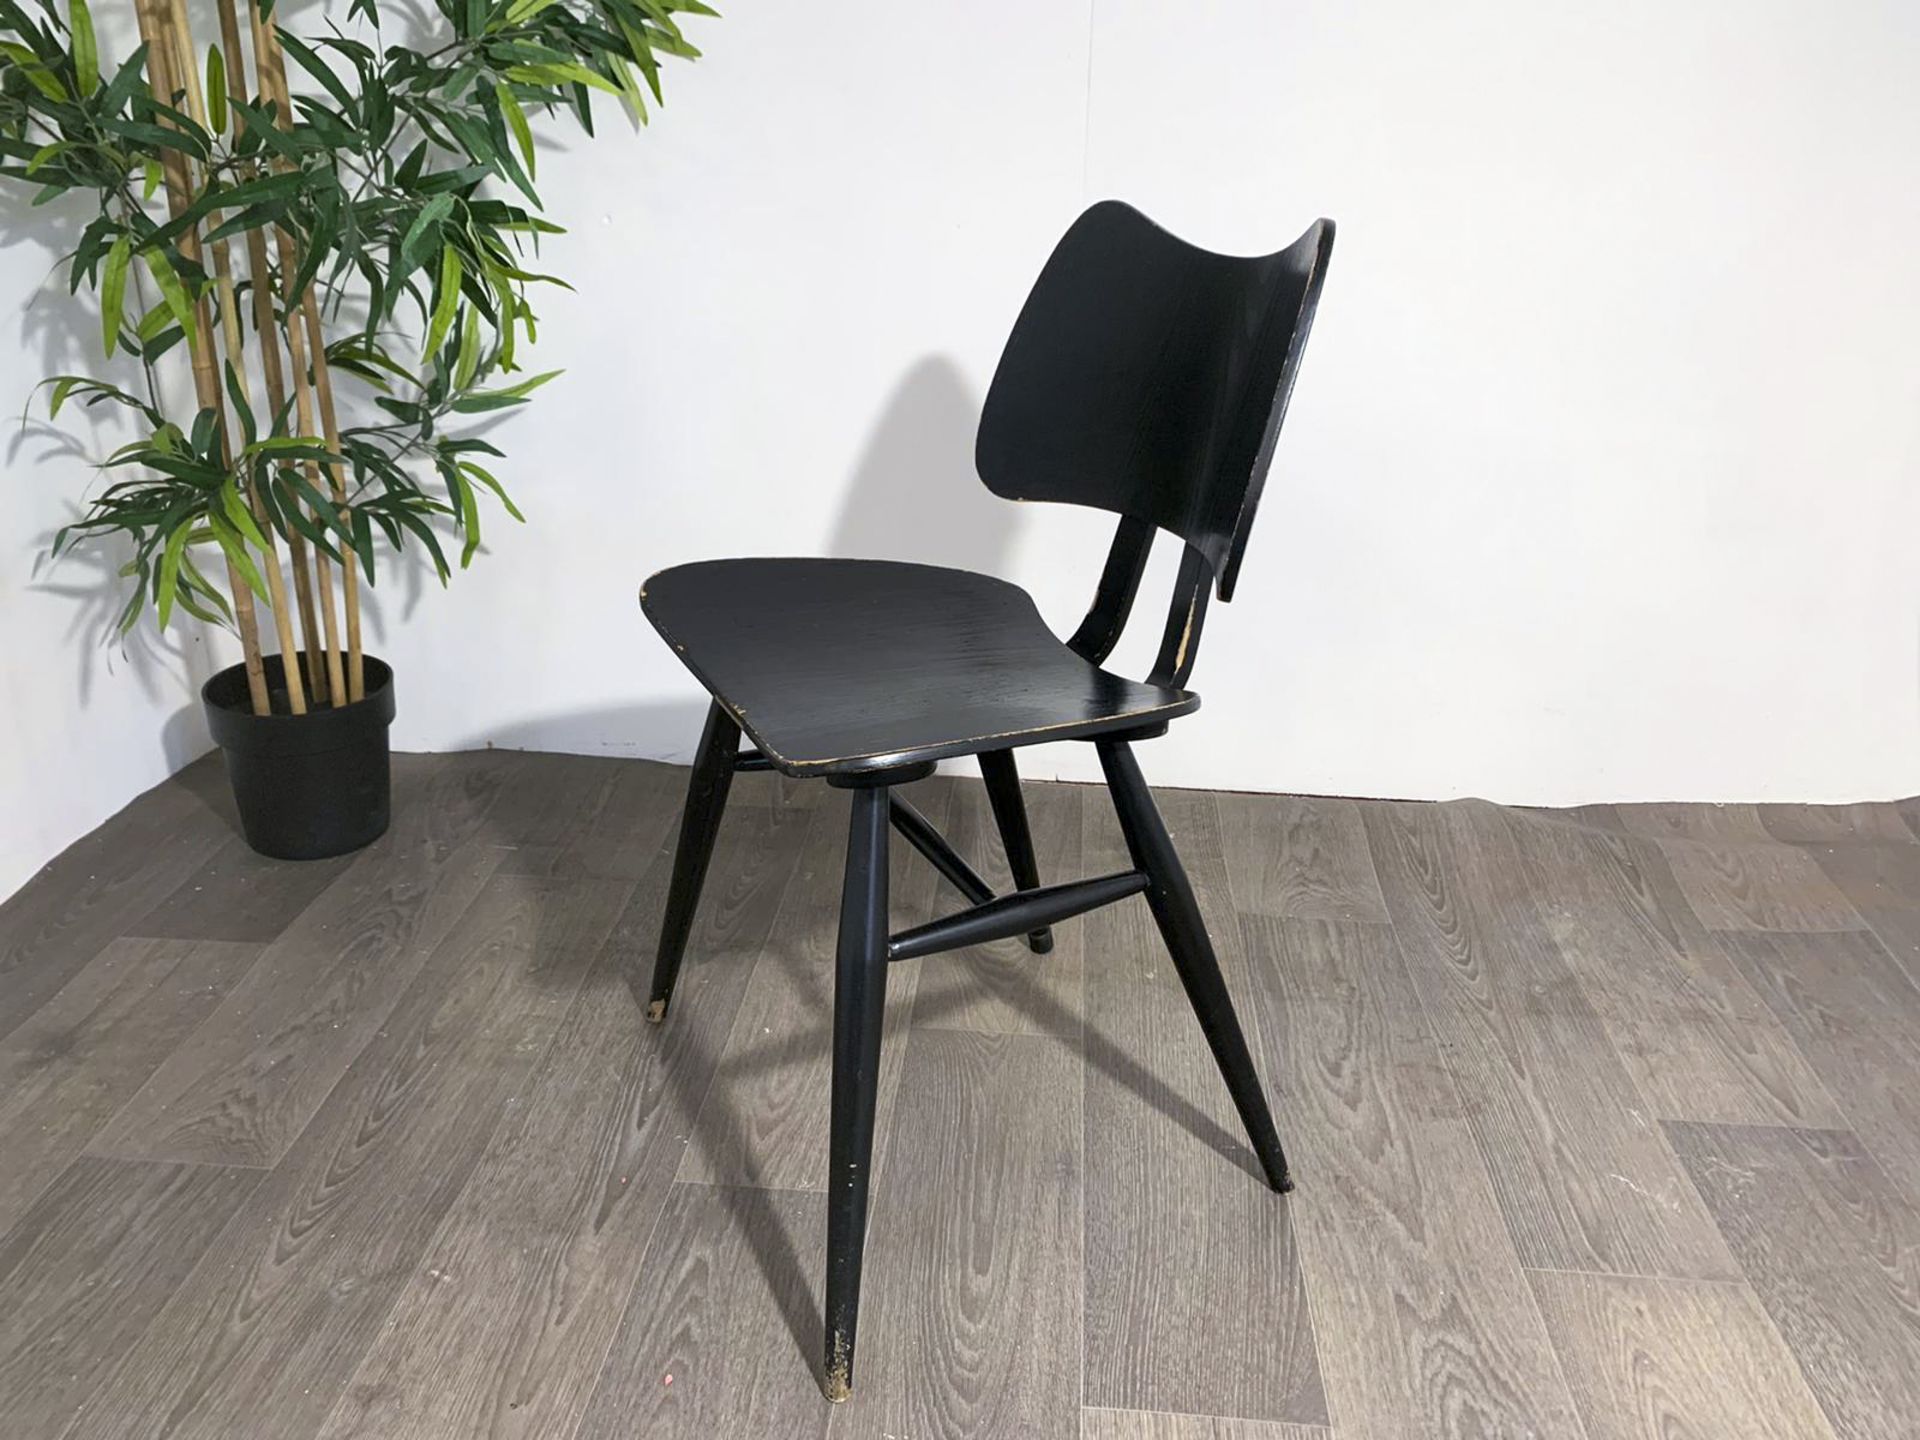 Ercol Black Butterfly Chair - Image 2 of 8